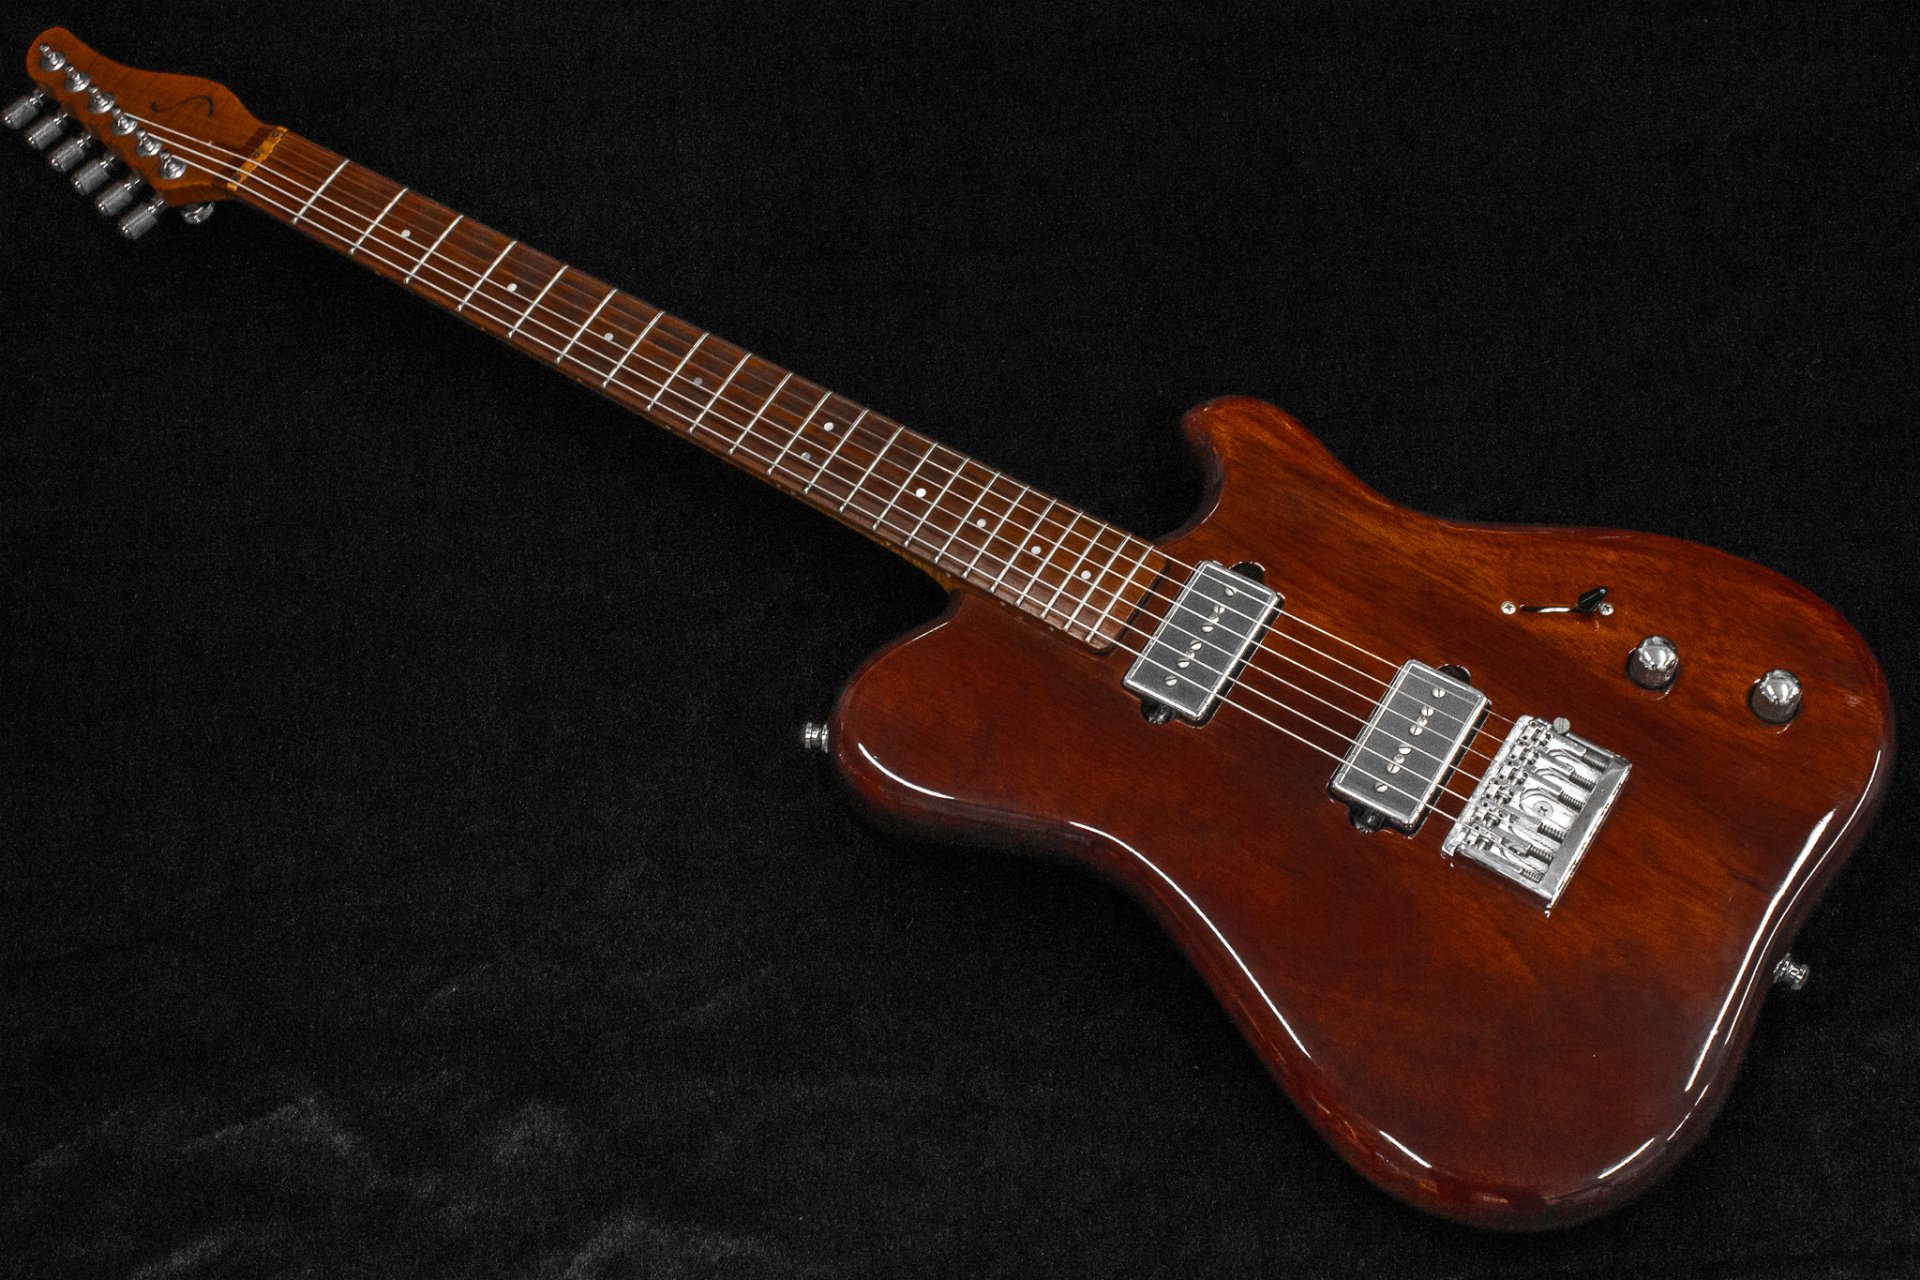 used】Soultool Customized Guitars / Performer T22 #ST000002C 4.01 ...